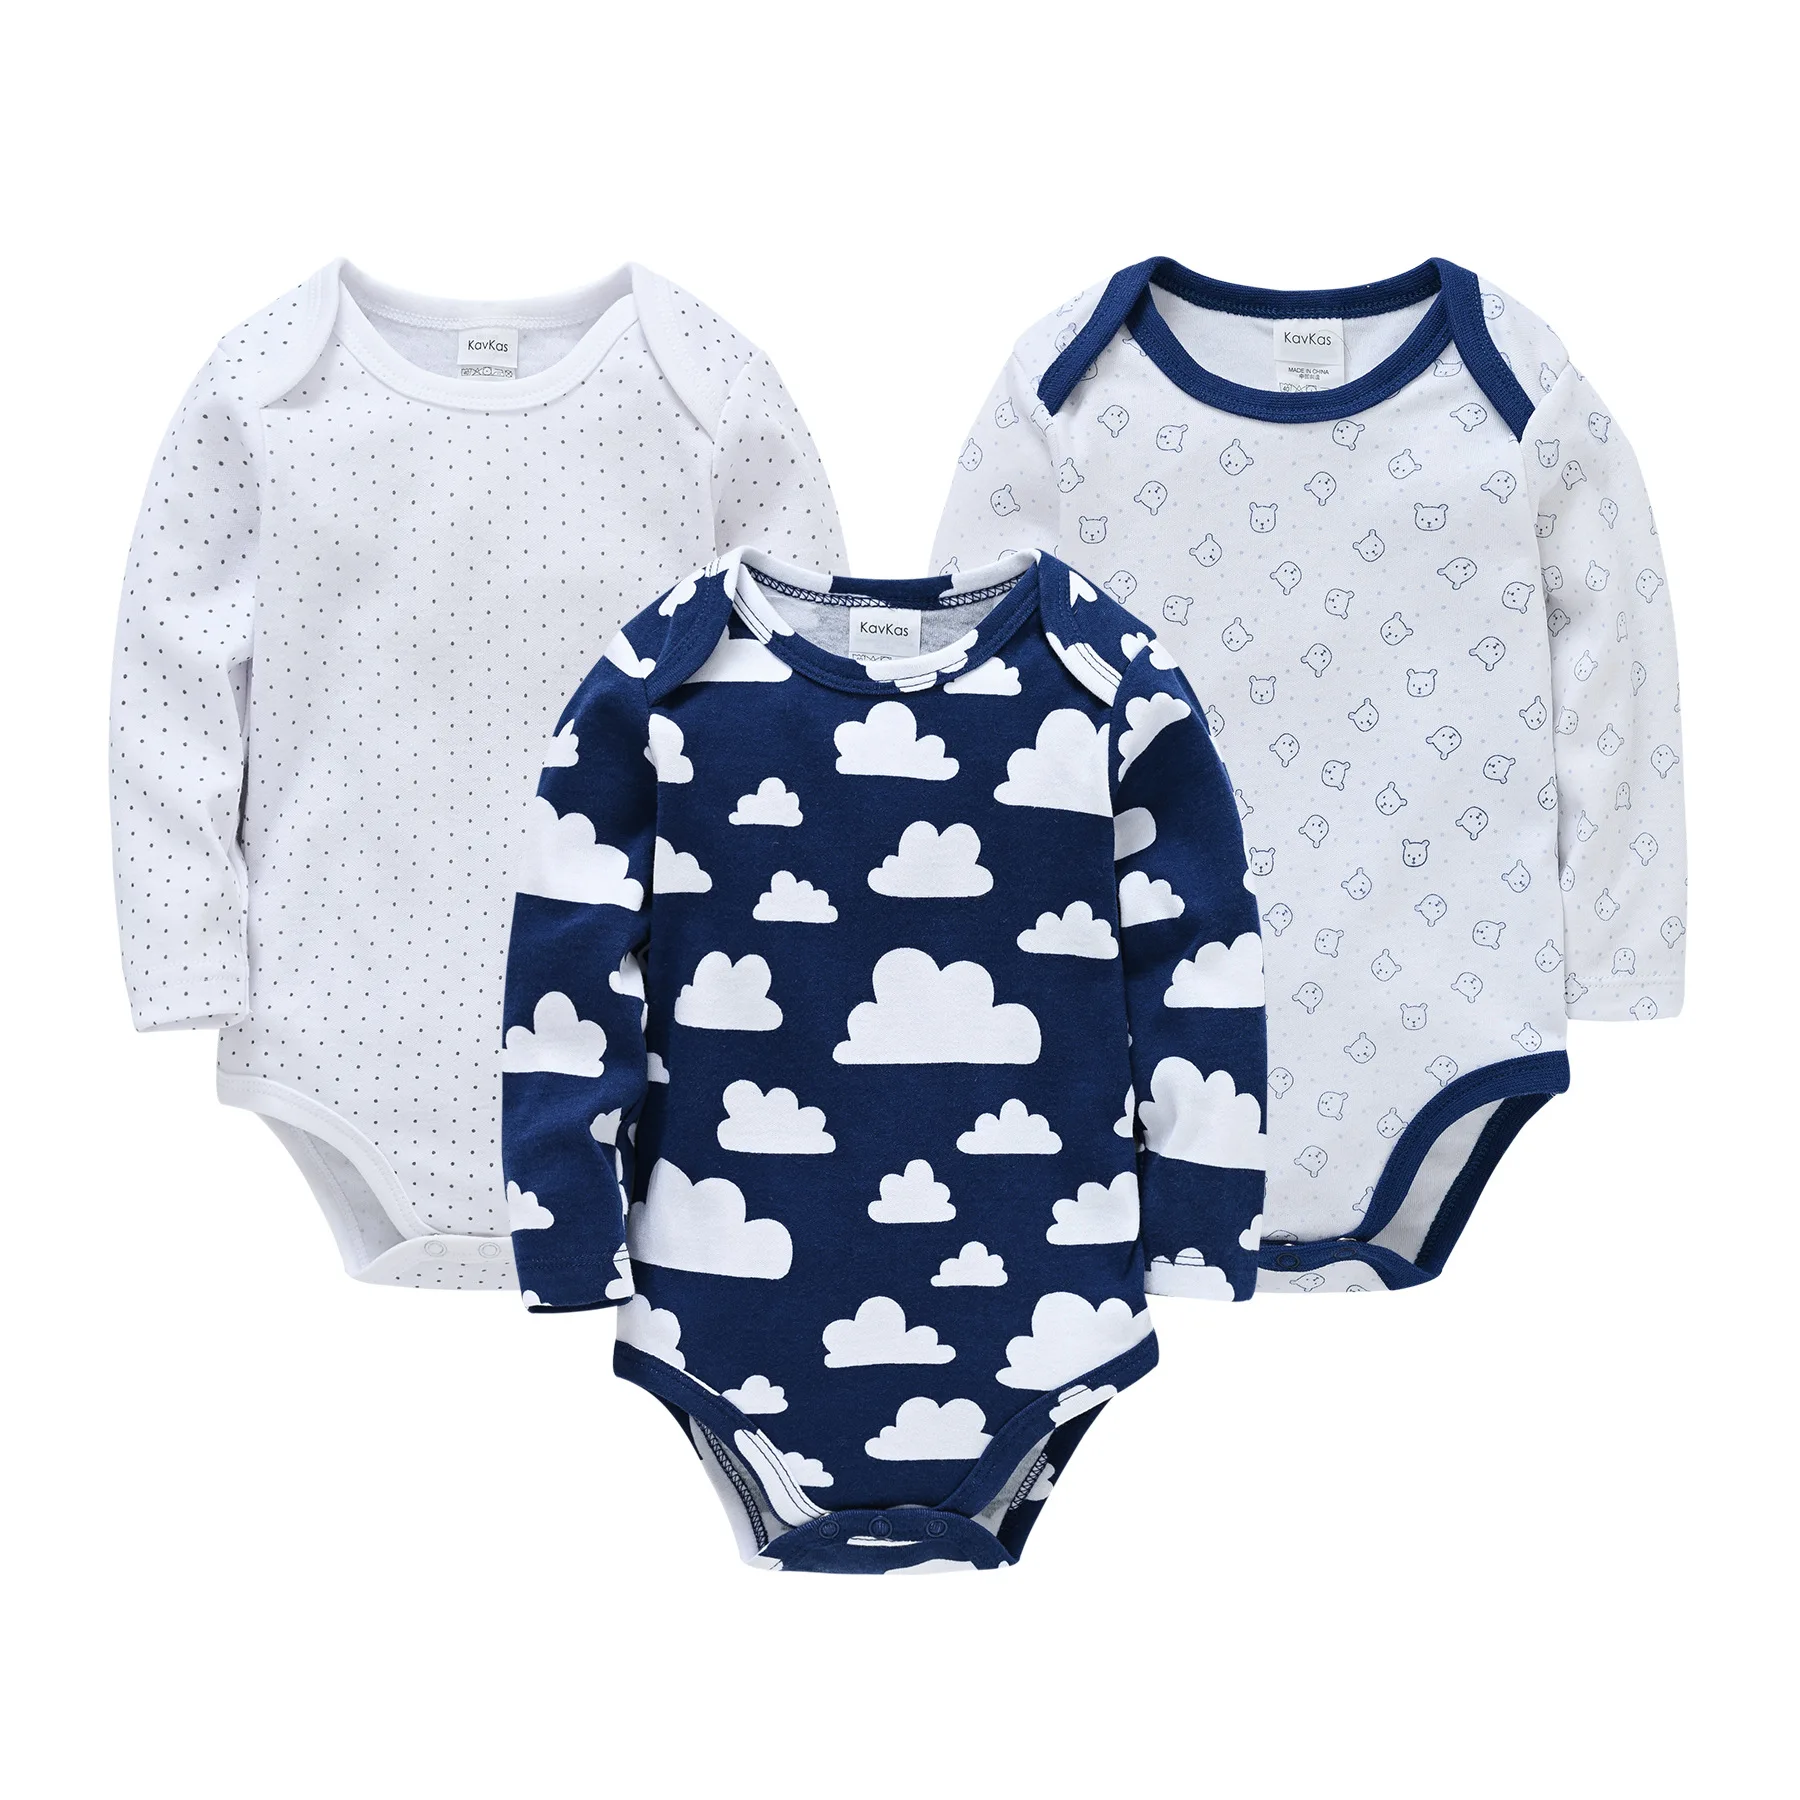 

JiAmy Comfortable 3 Piece Sets Cotton Sleepwear Infants Clothes Baby Rompers For 0-12M